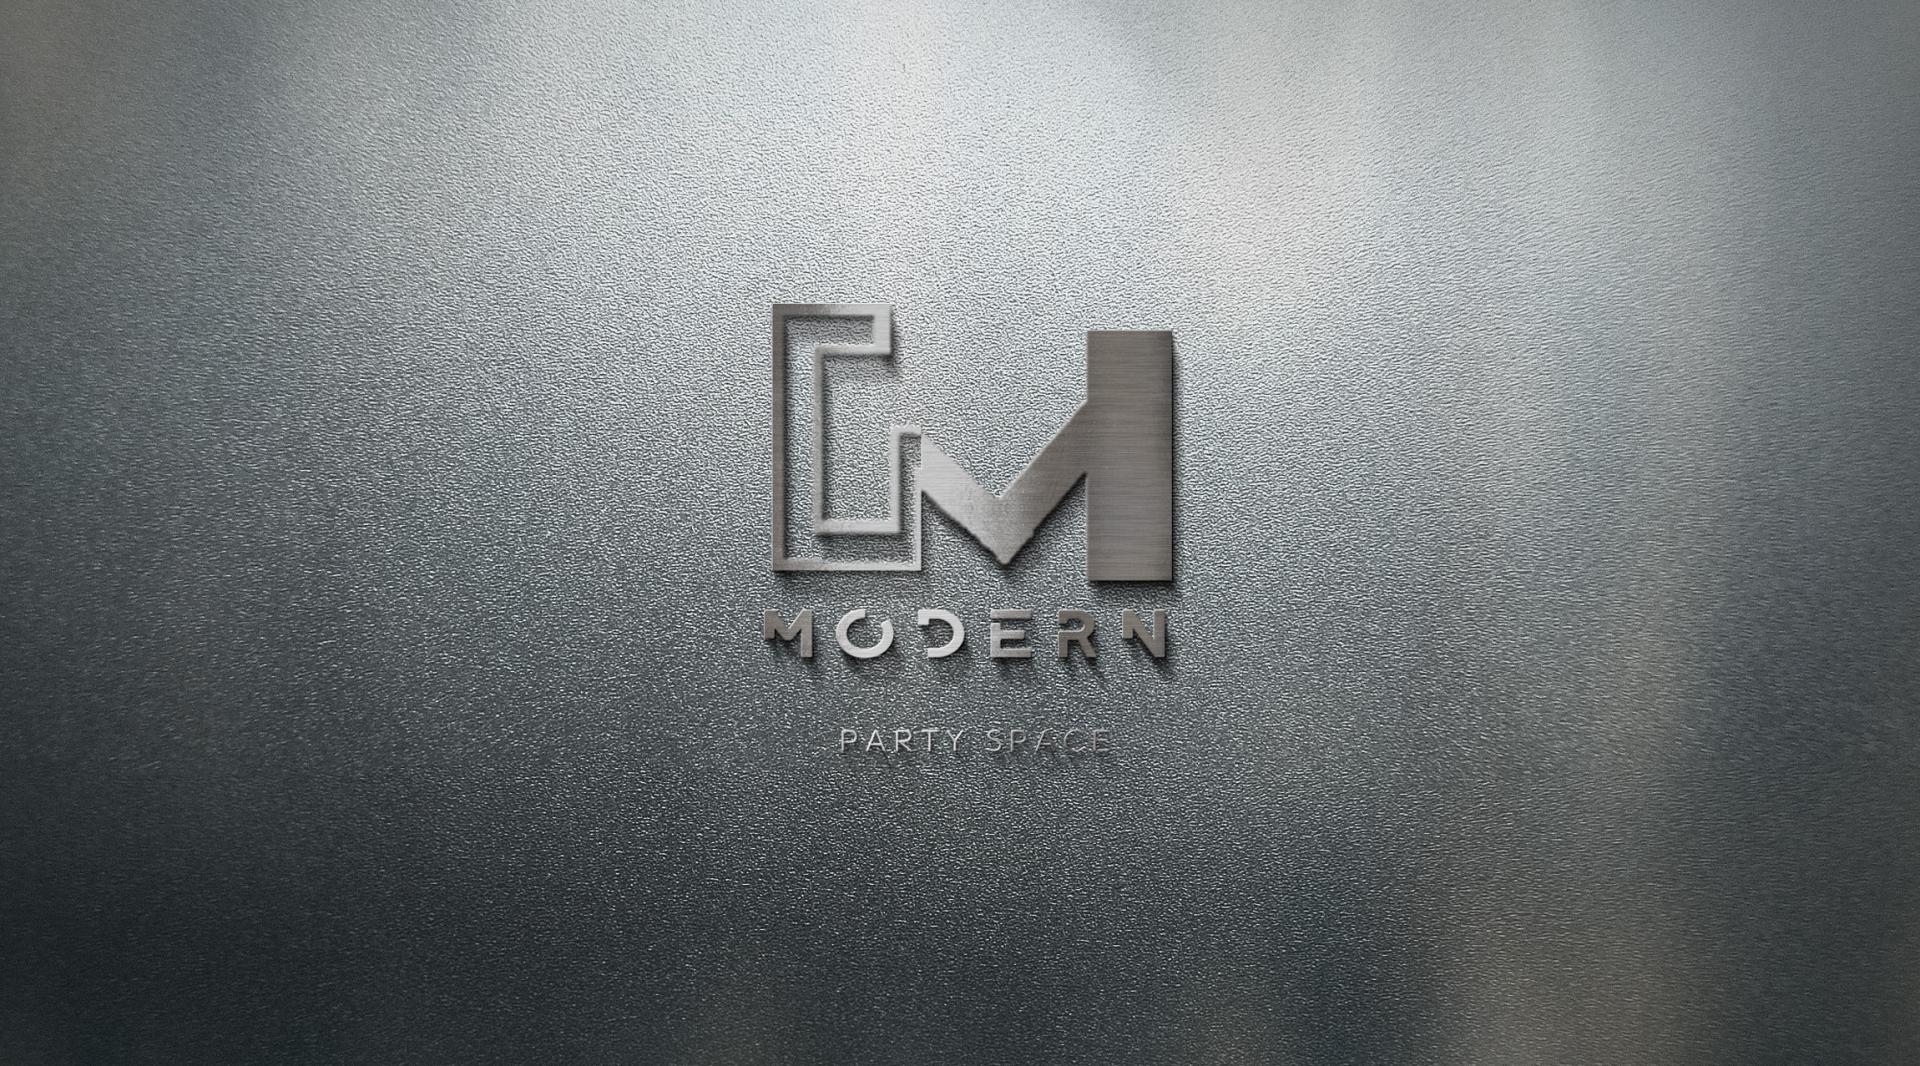 Modern party space为突破而生